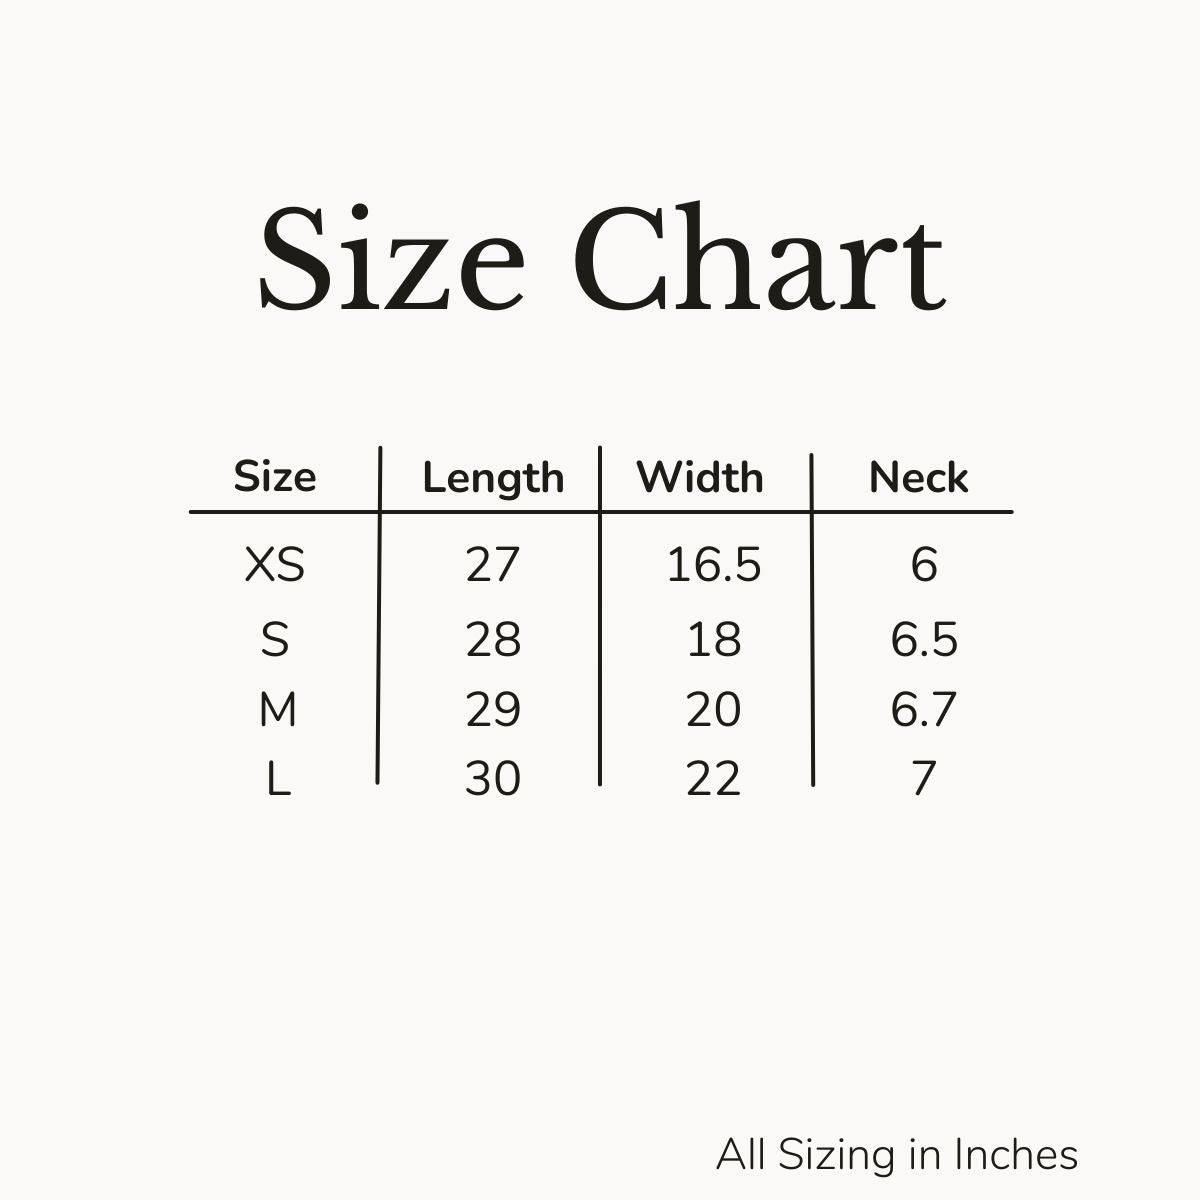 The Forage Hyperfoods shirt sizing chart including XS, S, M, L sizes in length, width and neck size.